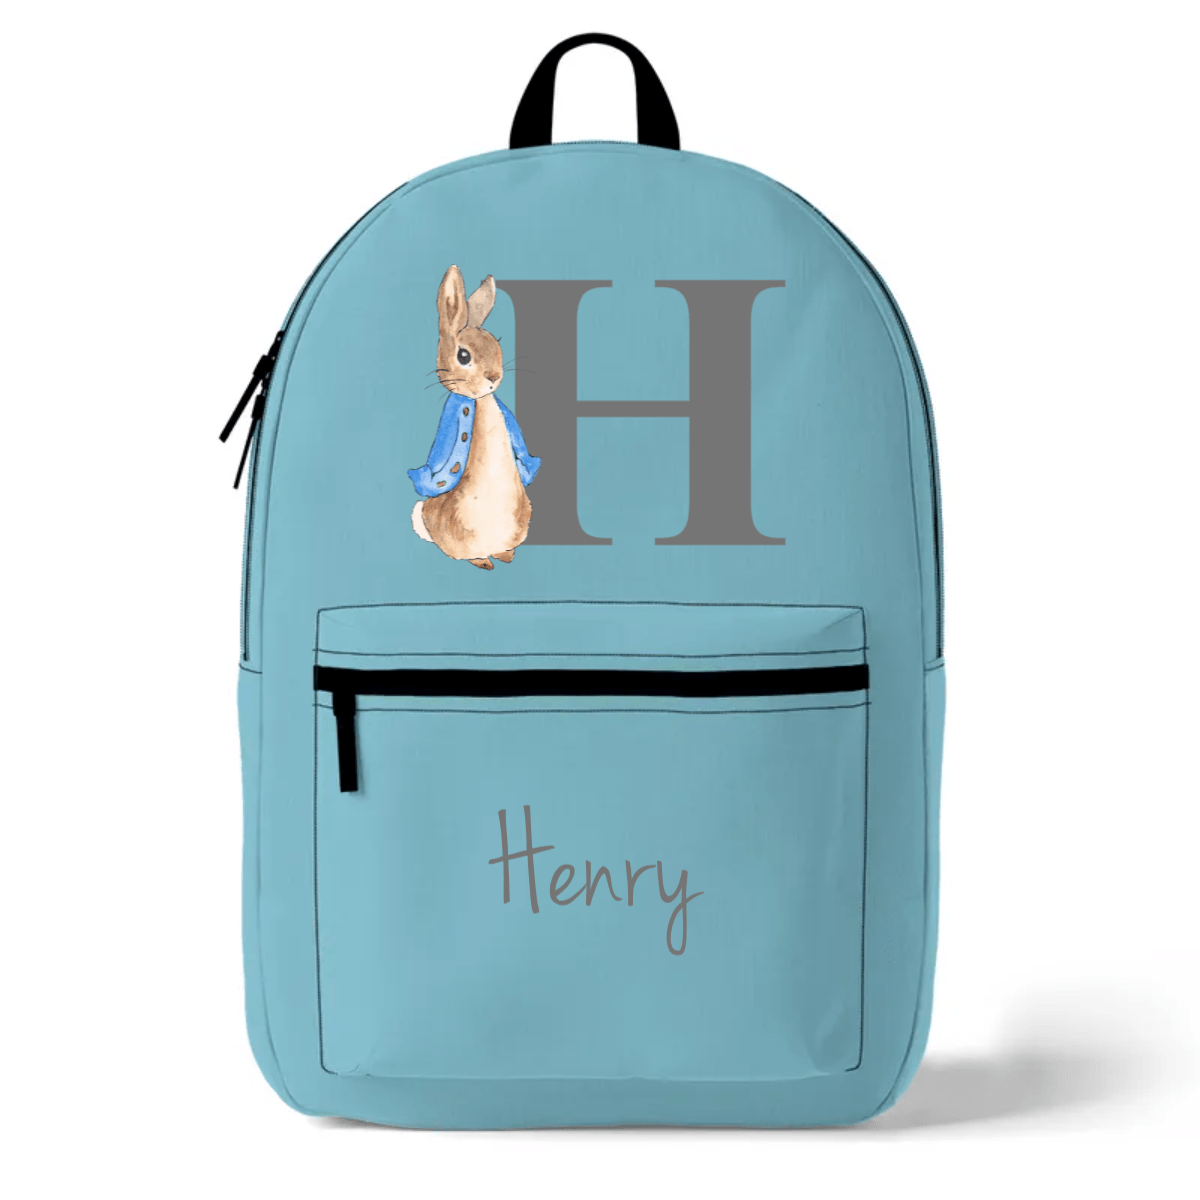 Personalized Backpack With Kid Name - Custom Gift For Back To School, First Day of School - Student, Son, Daughter | Kindergarten, Pre-K, Preschool